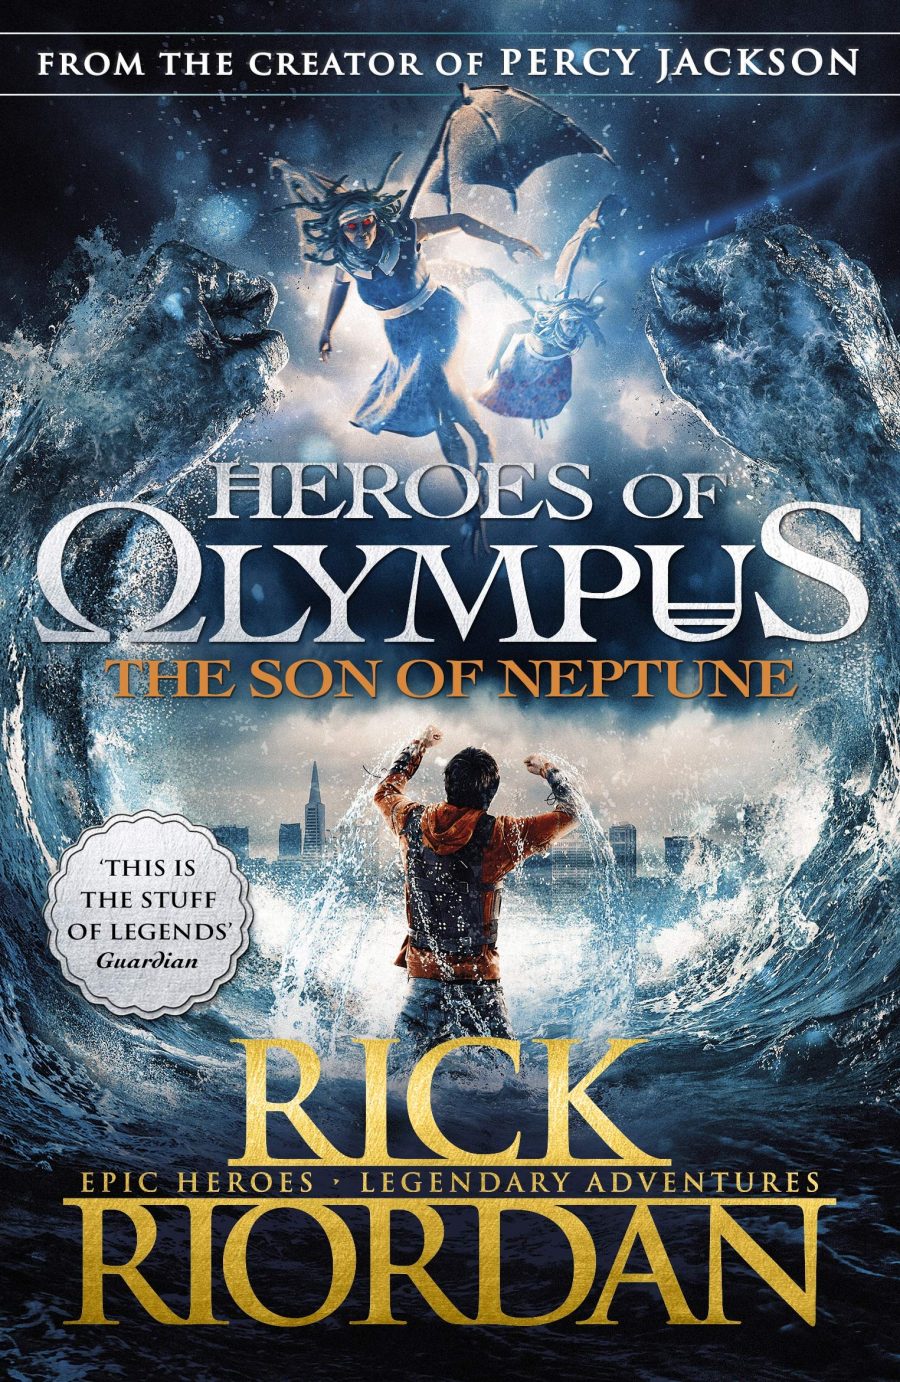 The Son of Neptune (Heroes of Olympus Book 2) Paperback